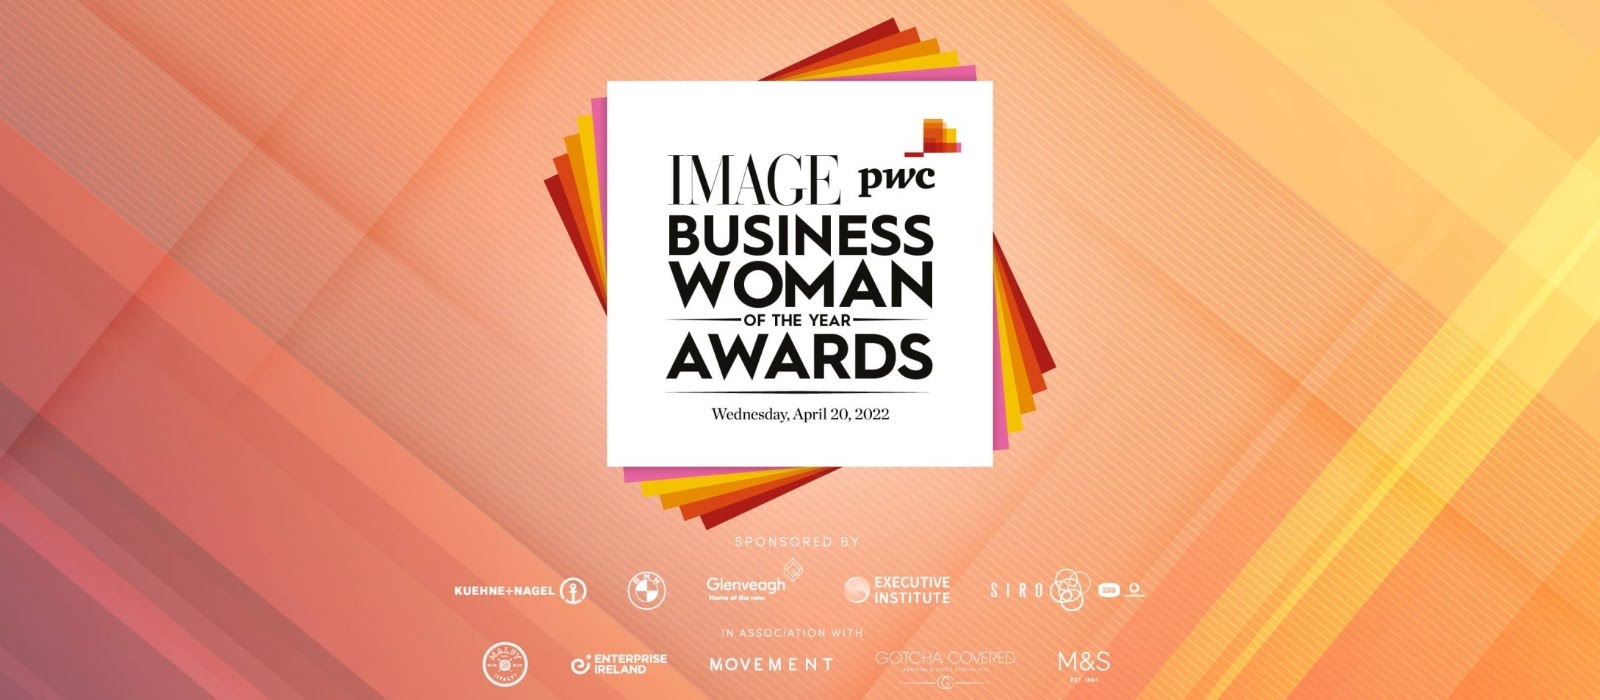 The IMAGE PwC Businesswoman of the Year Awards 2022 winners are…